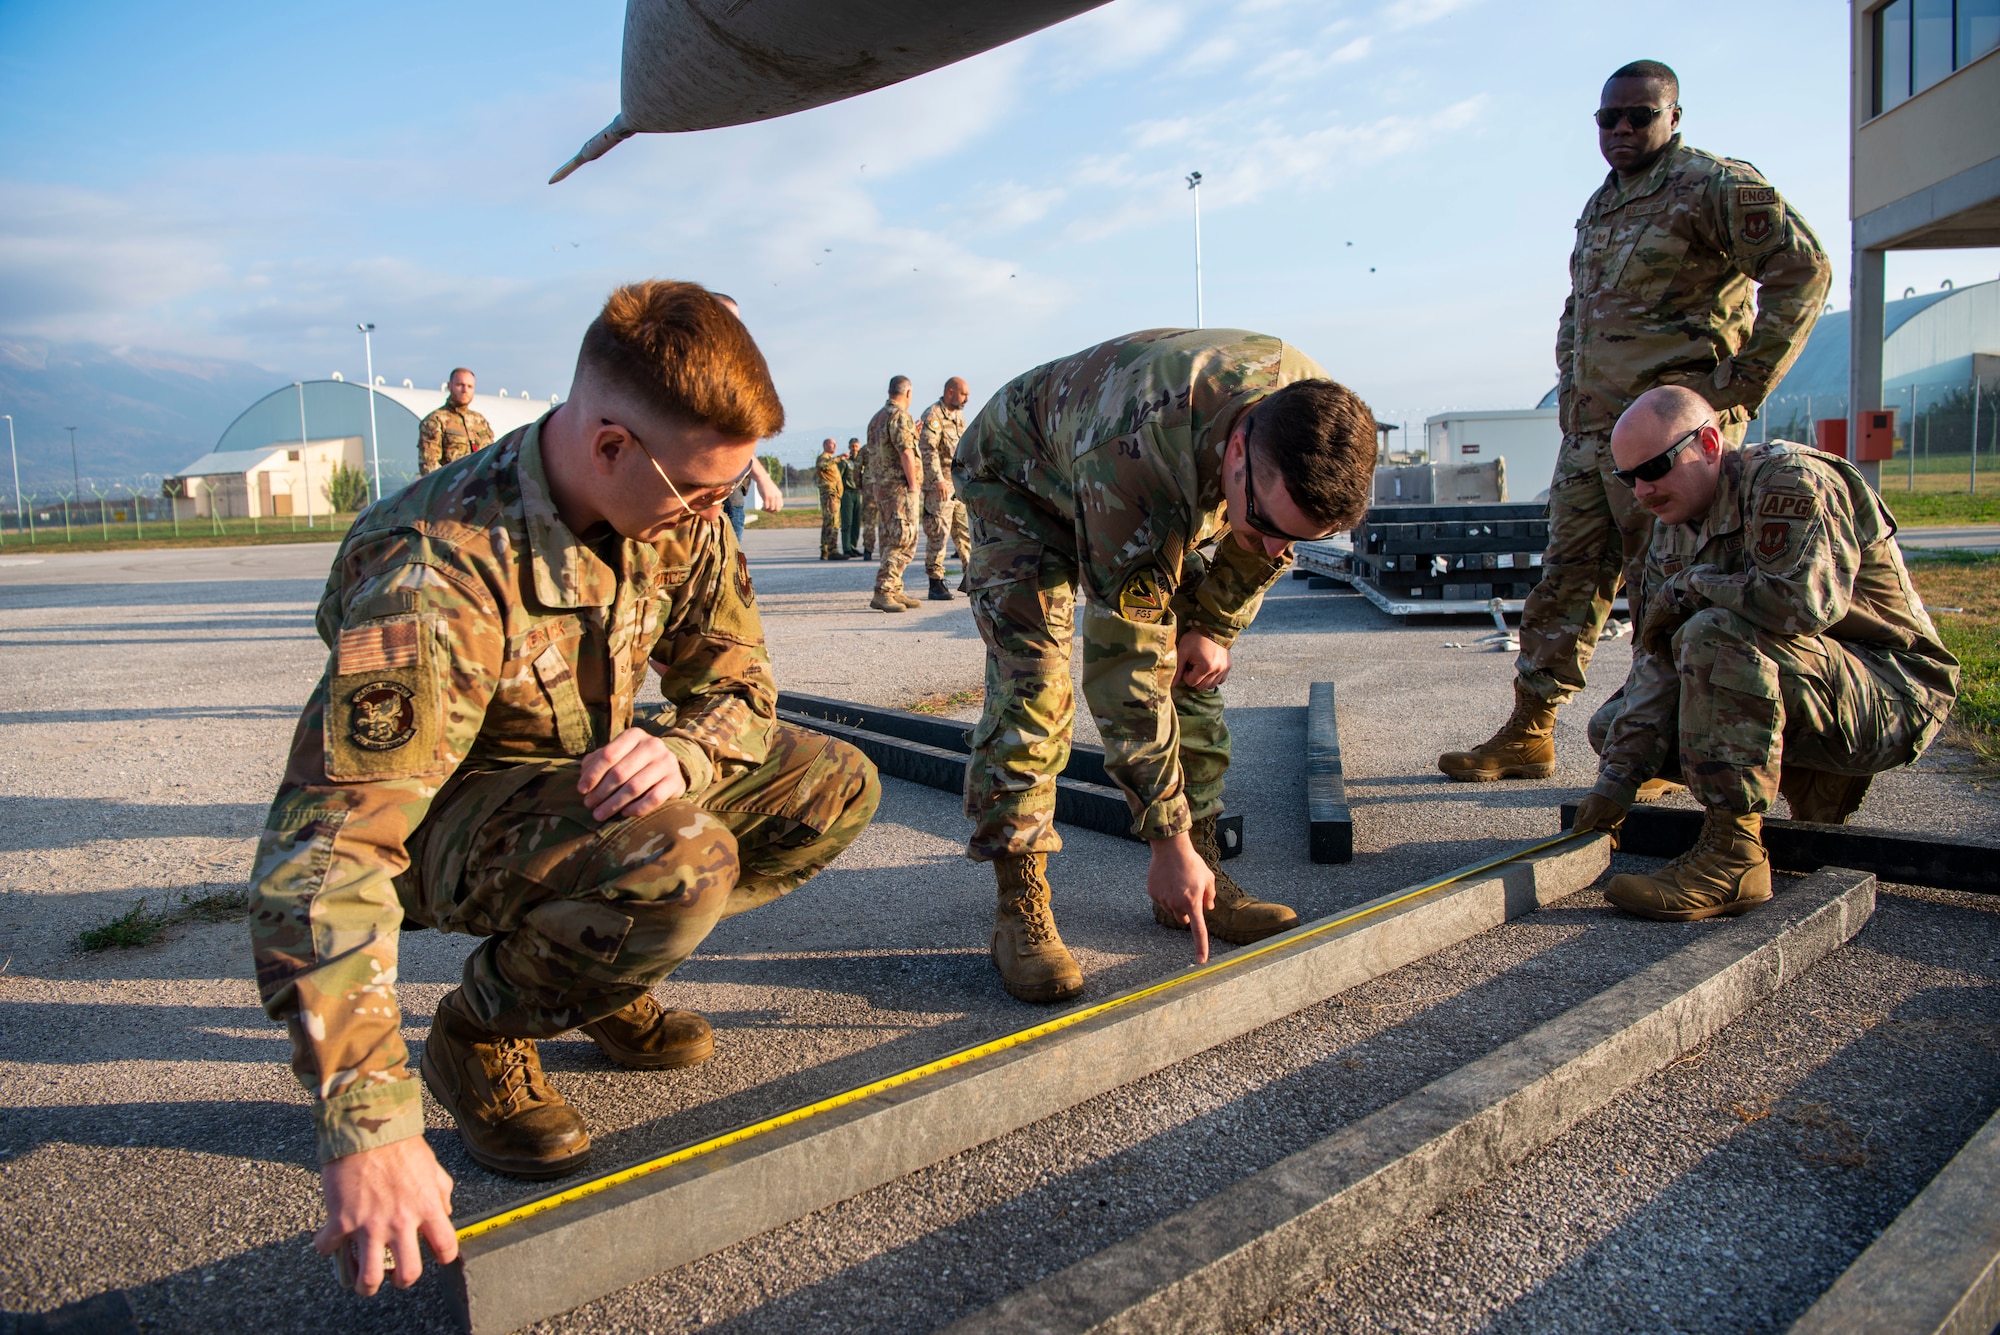 U.S. Airmen set up dunnage for a bag lift during a crashed, damaged or disabled aircraft recovery training at Aviano Air Base, Italy, Oct. 20, 2022. The dunnage is a set of wooden beams that was inserted under the bags that were inflated to lift the jet, helping the bags keep shape during the lift. (U.S. Air Force photo by Airman 1st Class Thomas Calopedis)